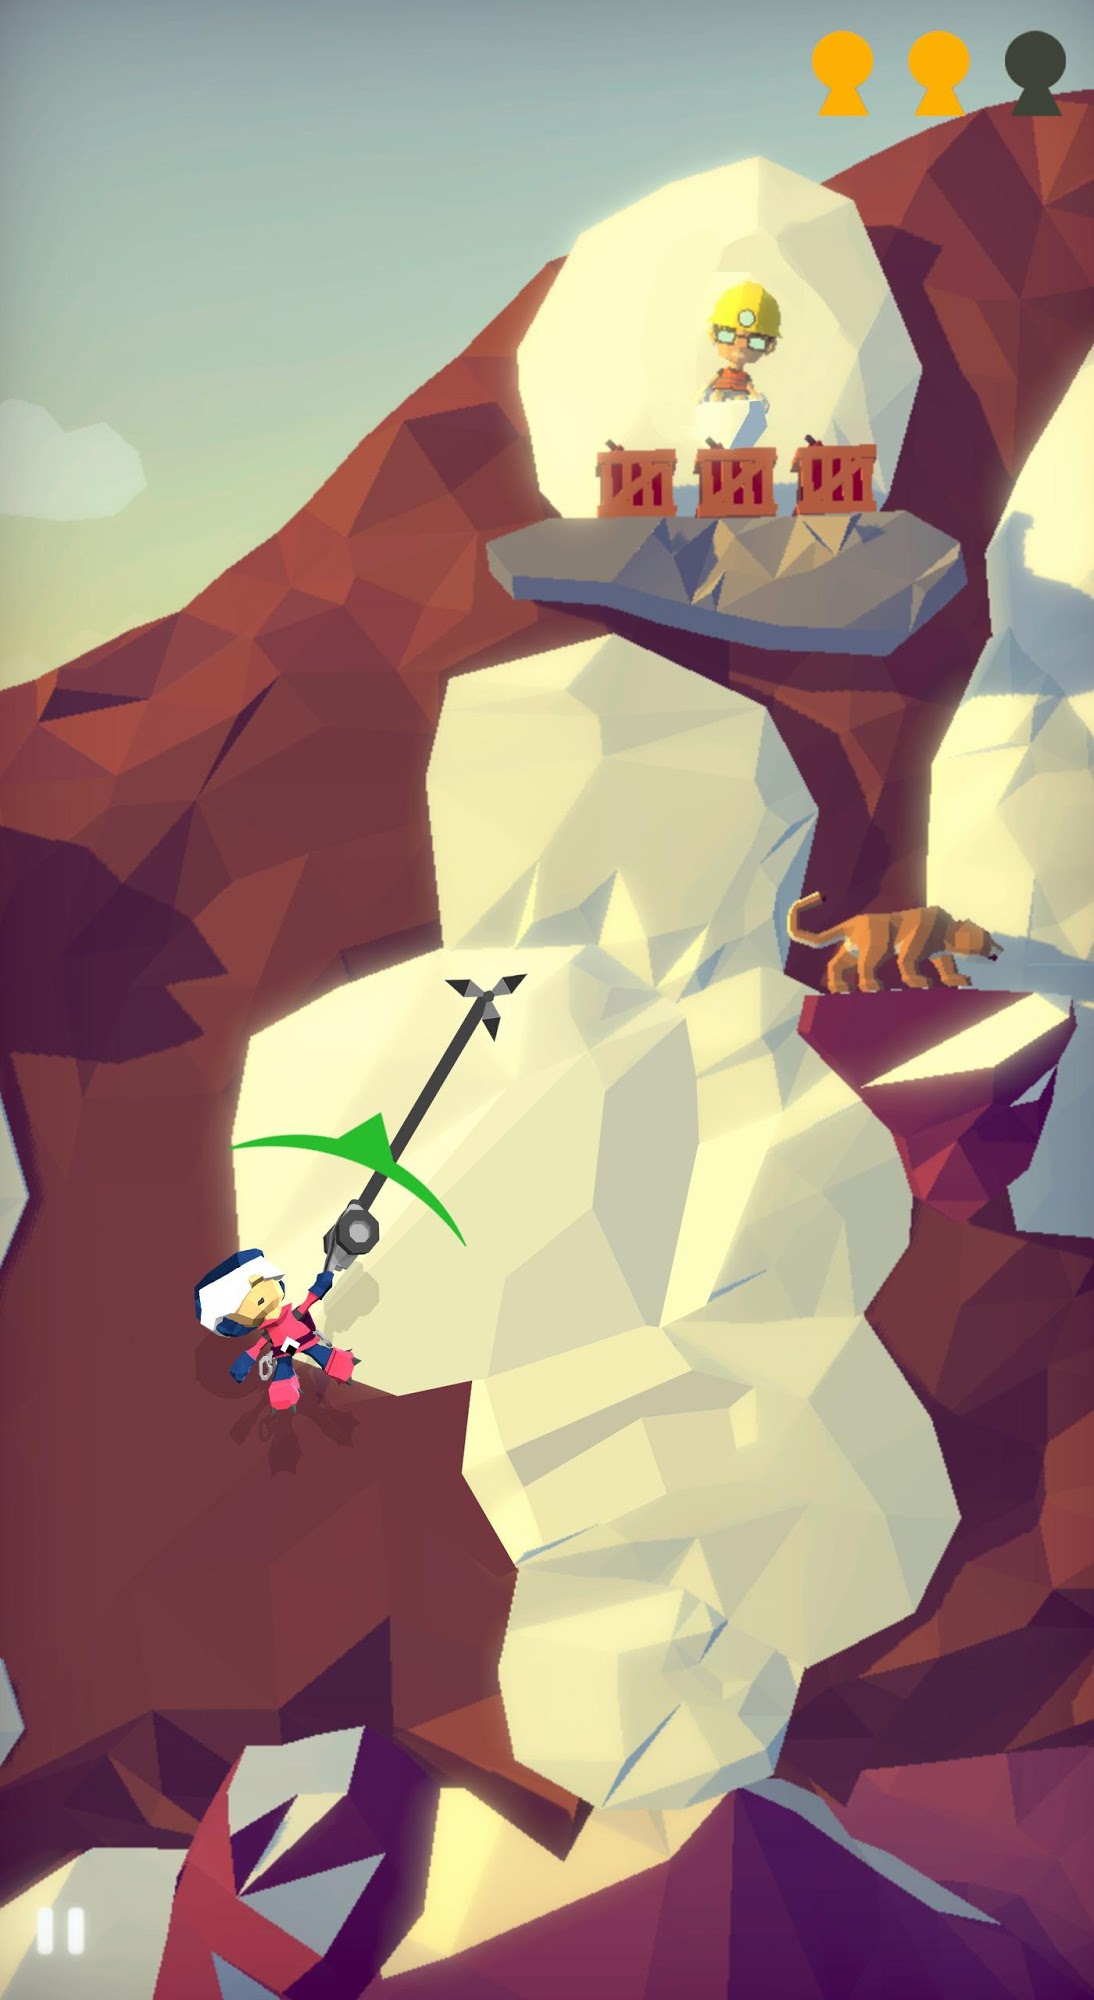 Hang Line: Mountain Climber for Android